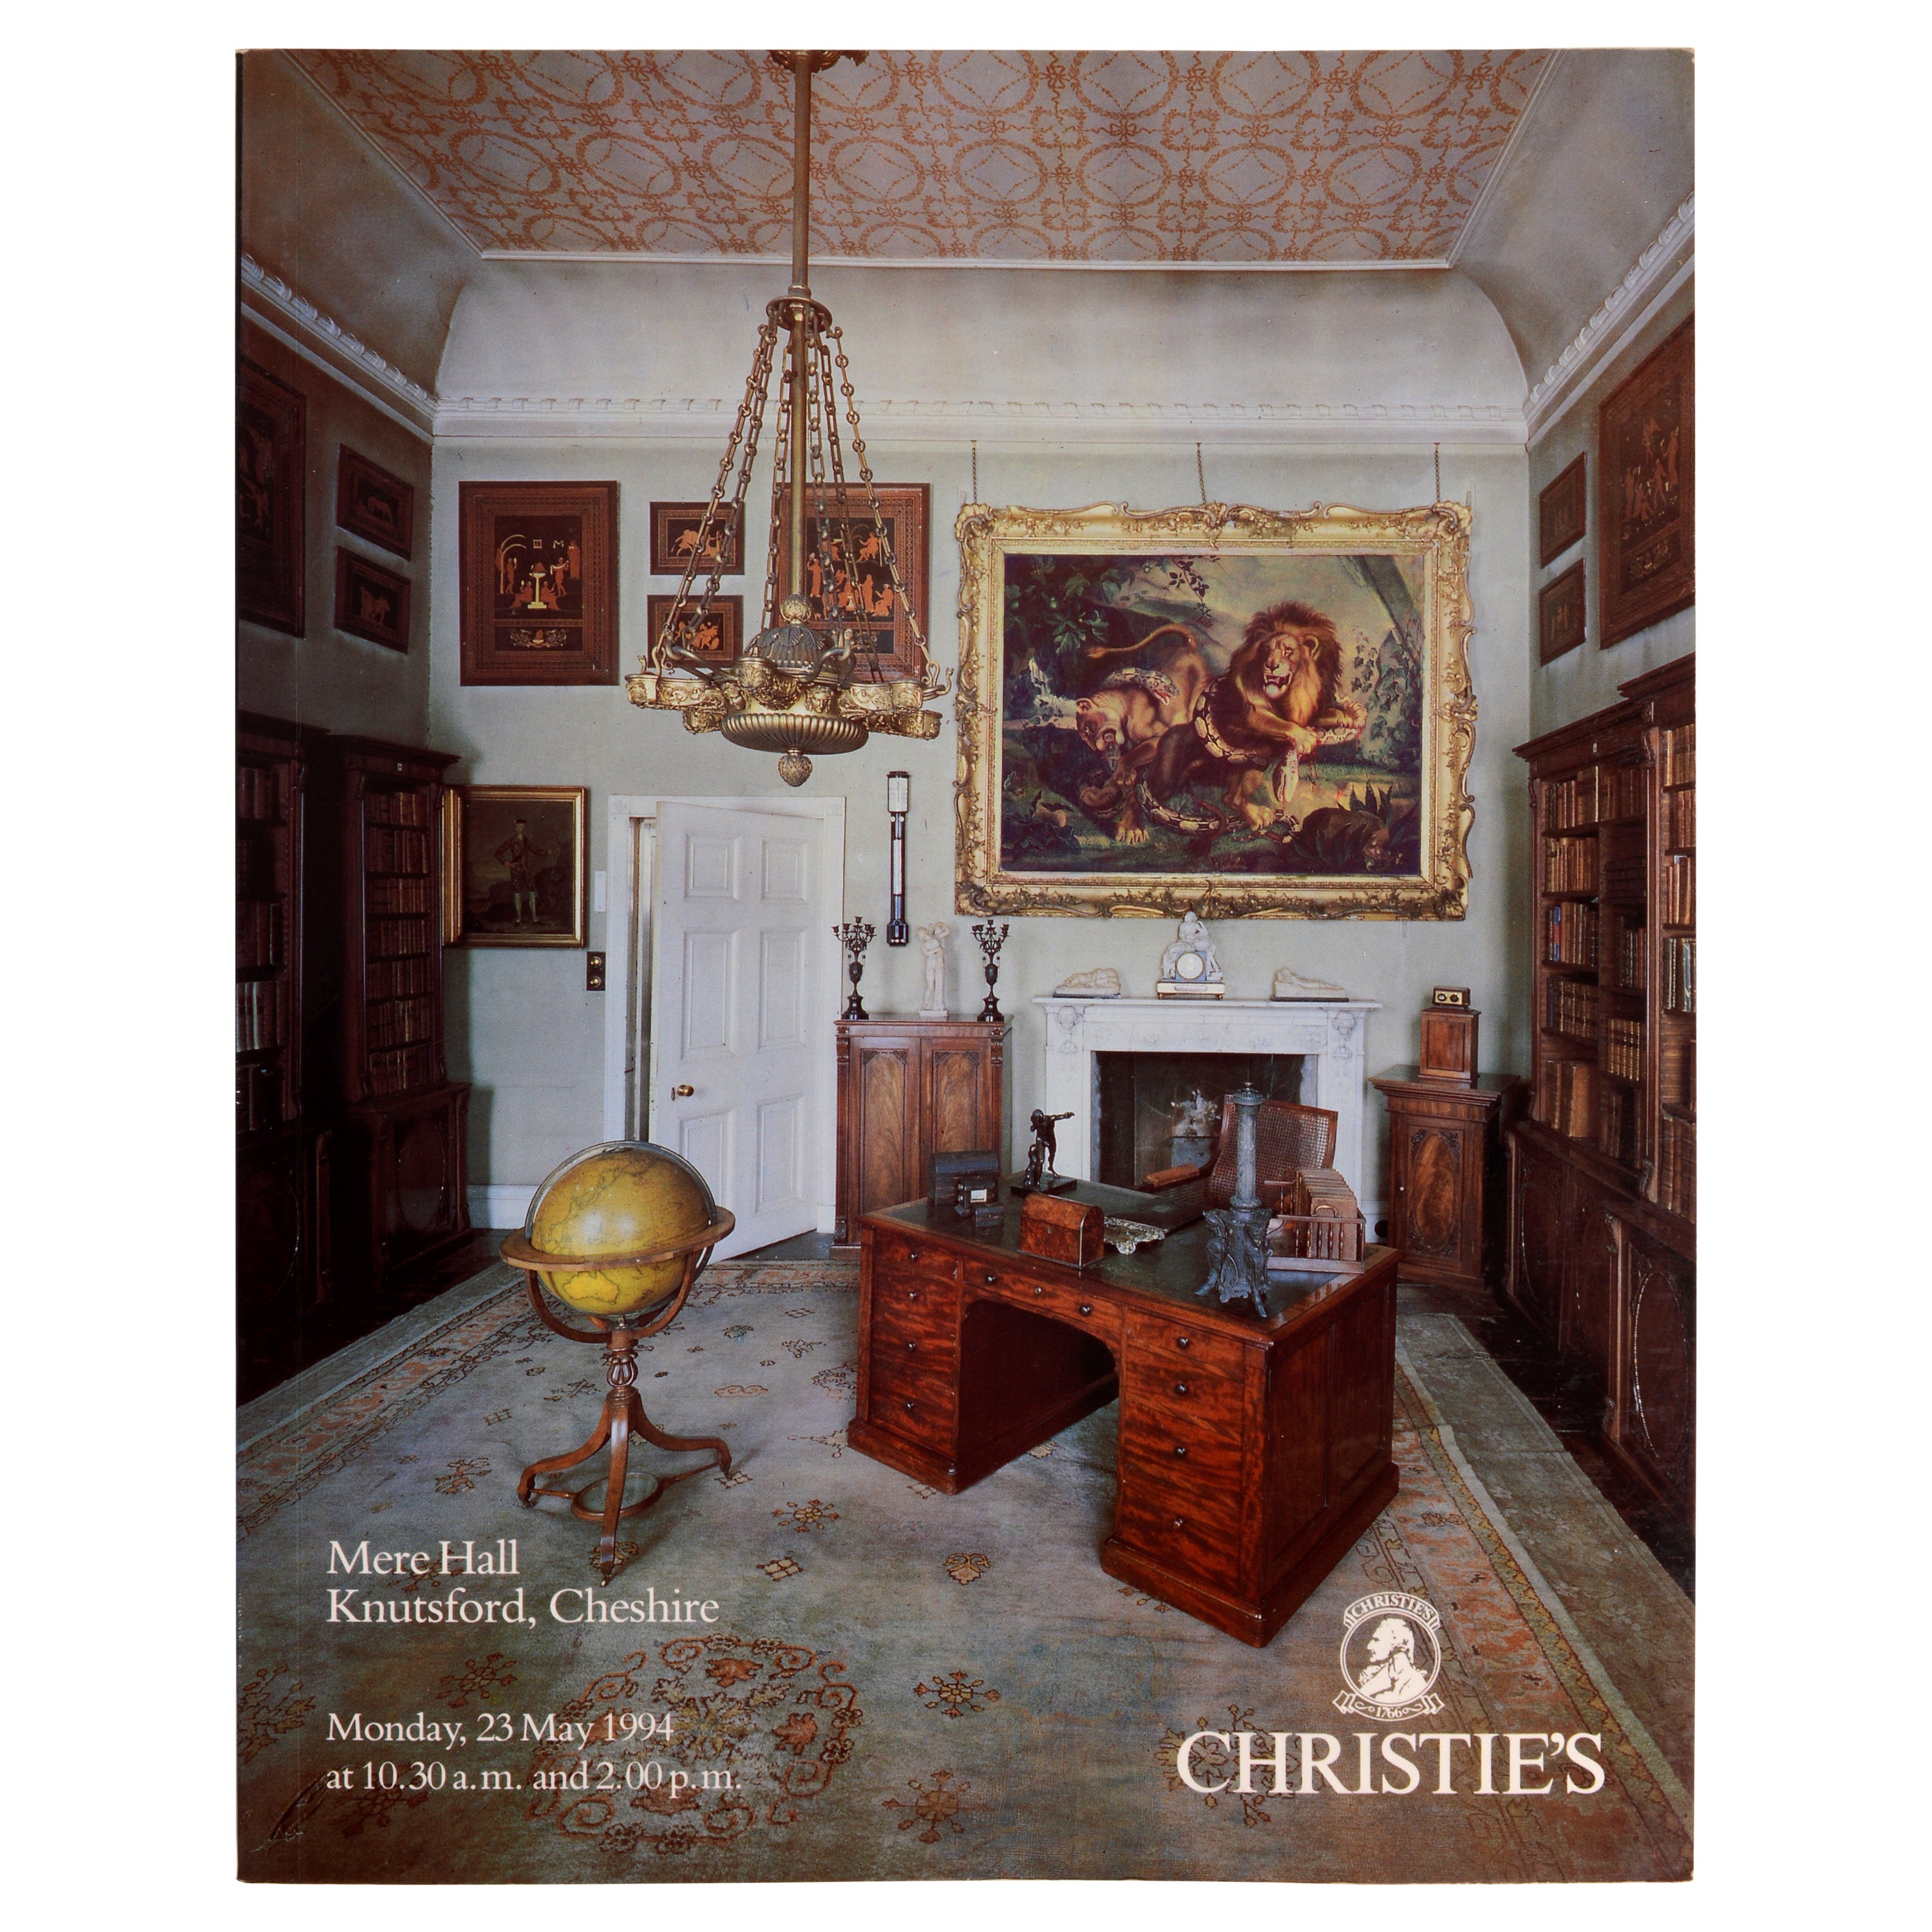 Christie's: May 23, 1994 Mere Hall, Knutsford Cheshire, 1st Ed